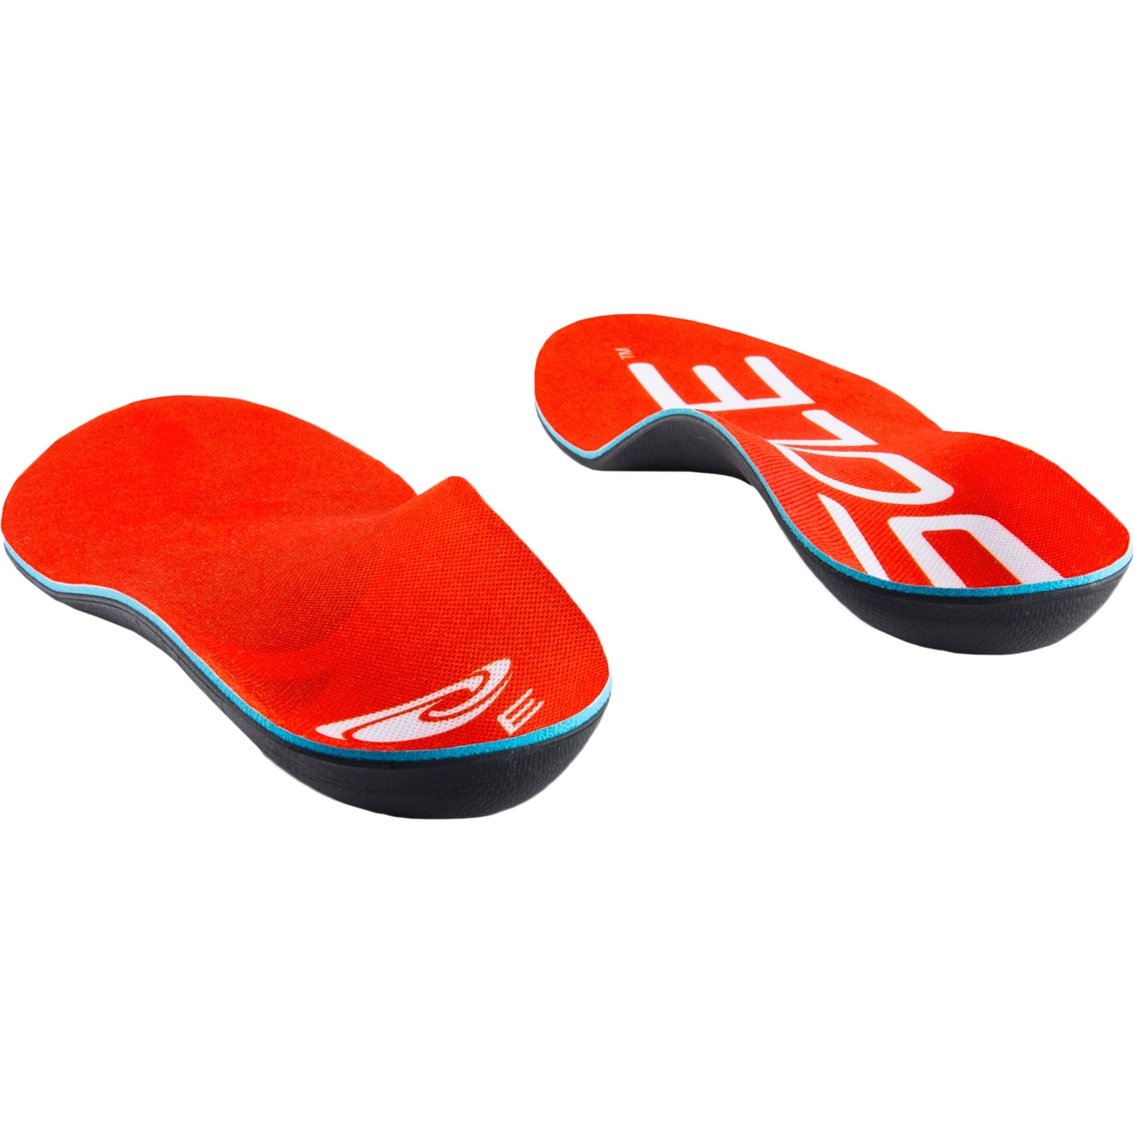 Sole Active Medium Footbed Insole - Image 5 of 7